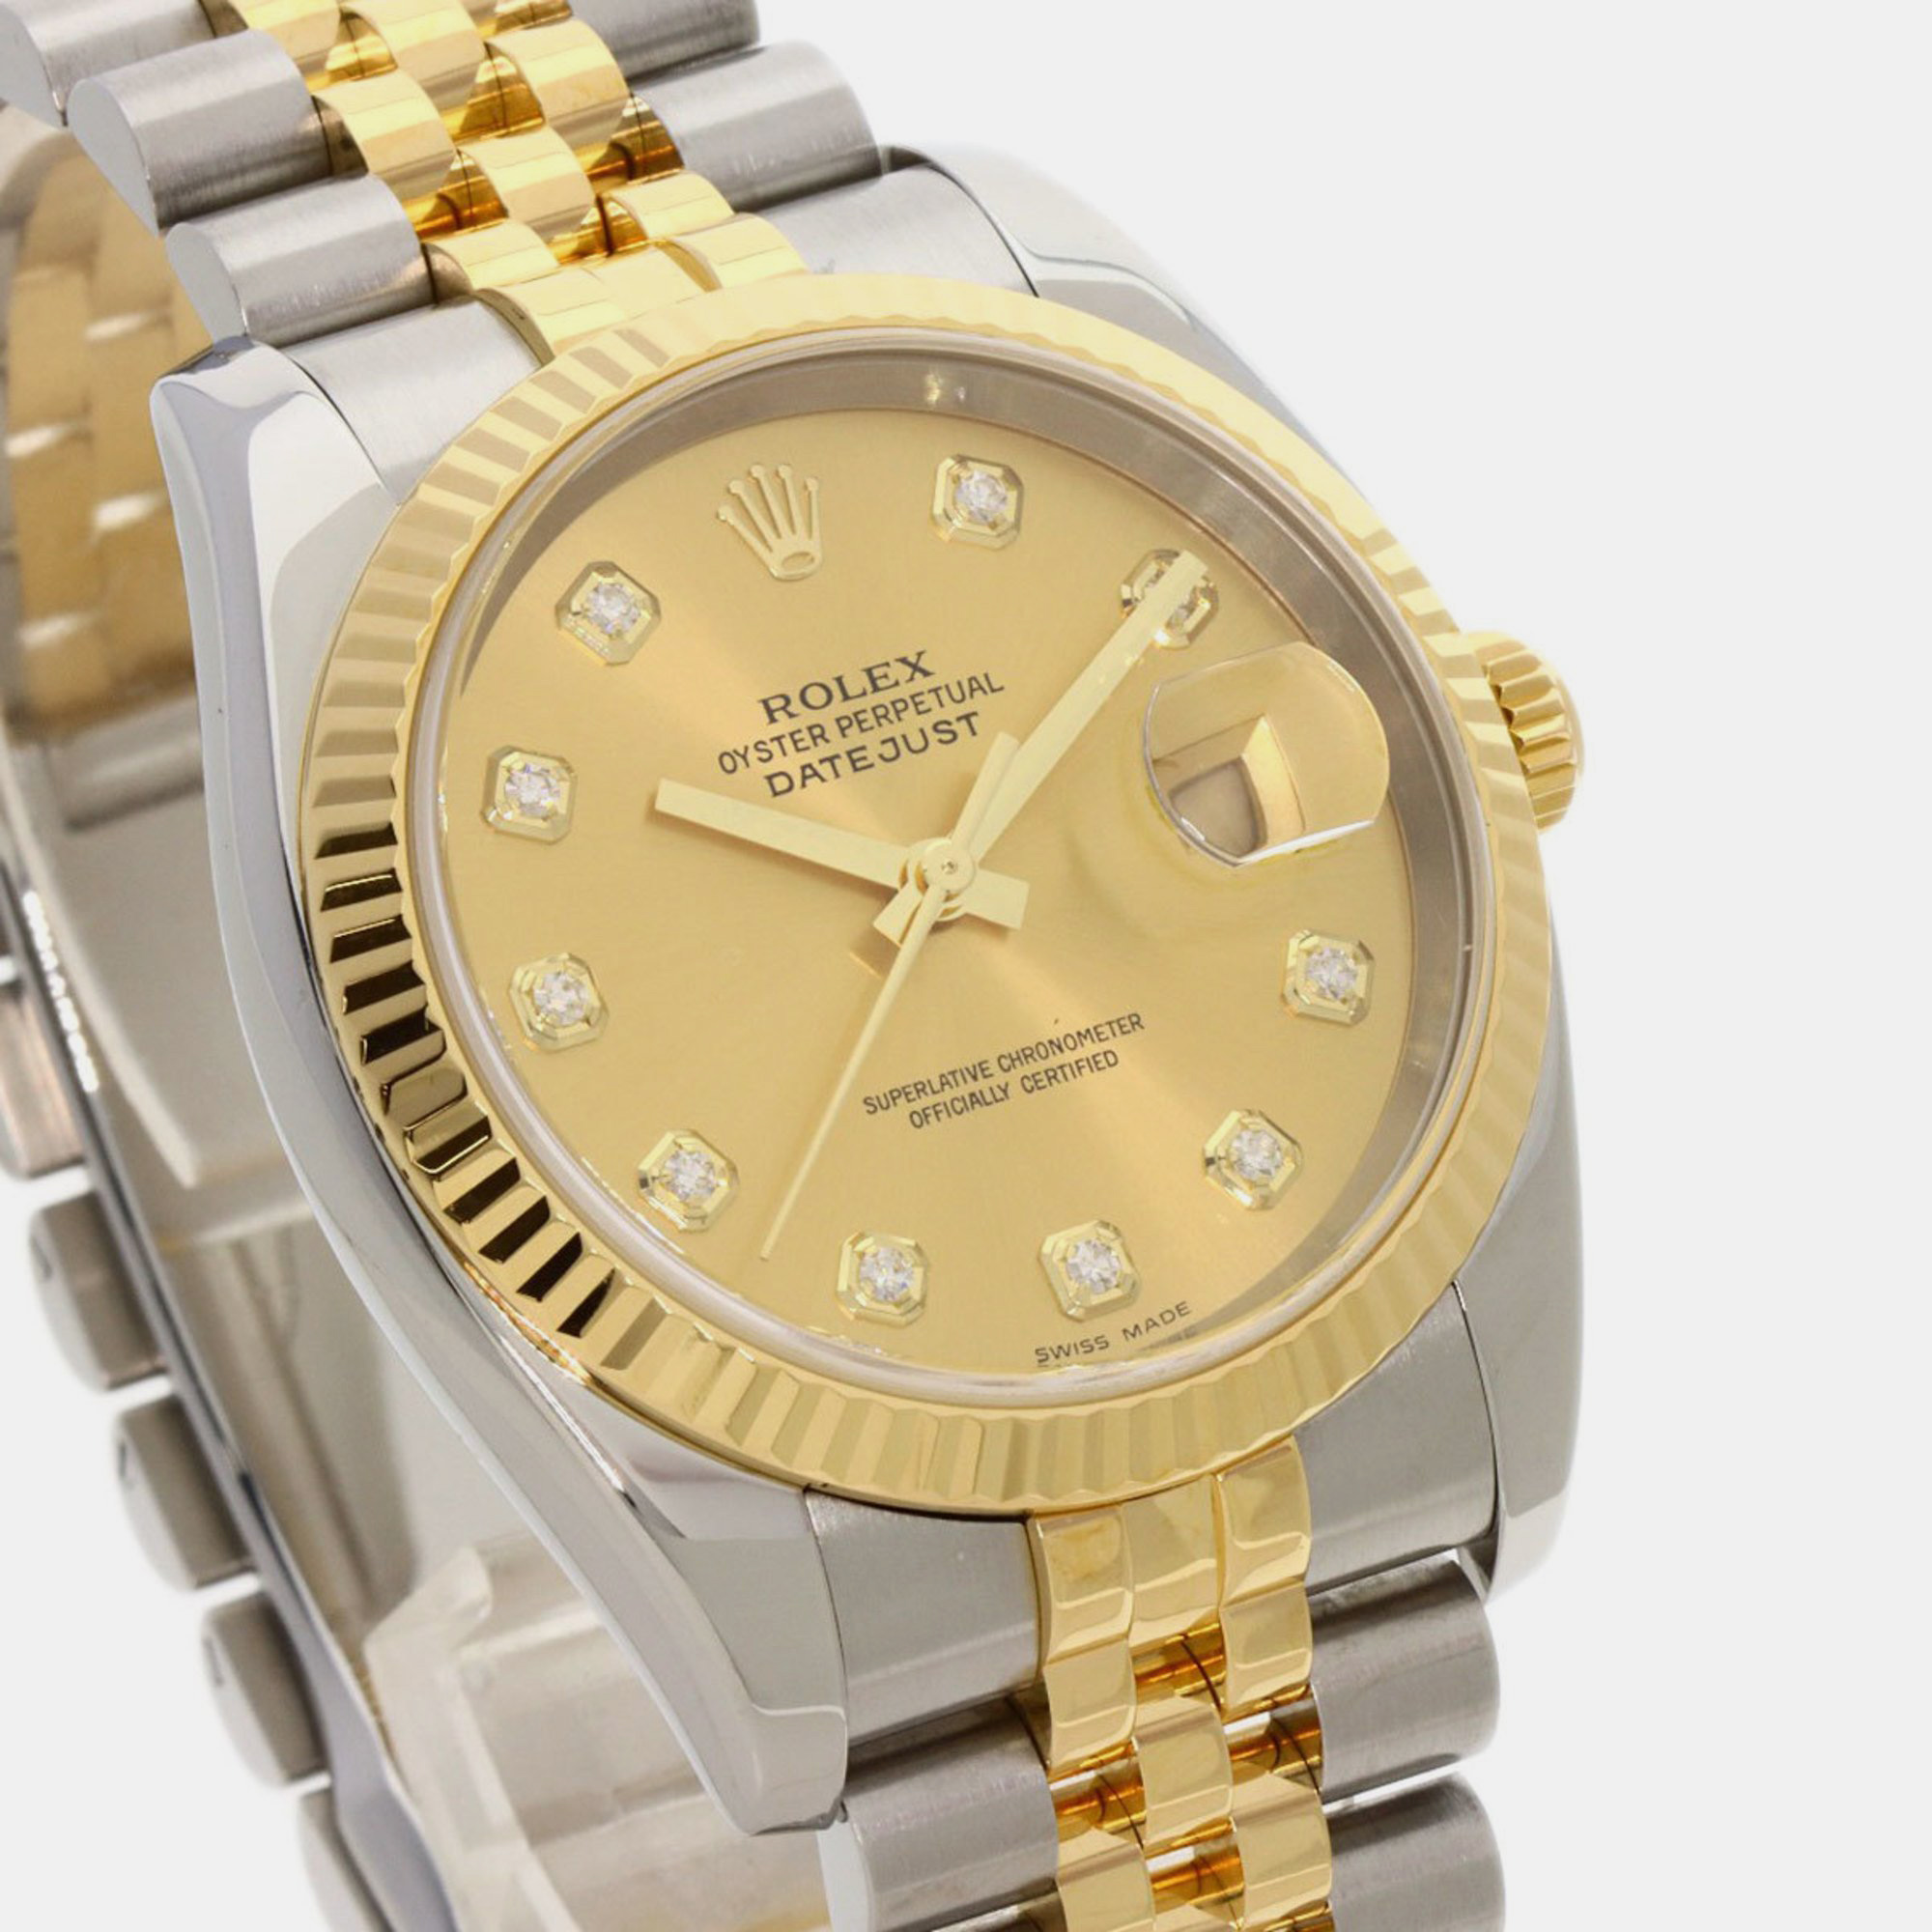 Rolex Champagne Diamond 18k Yellow Gold And Stainless Steel Datejust 116233 Automatic Men's Wristwatch 36 Mm